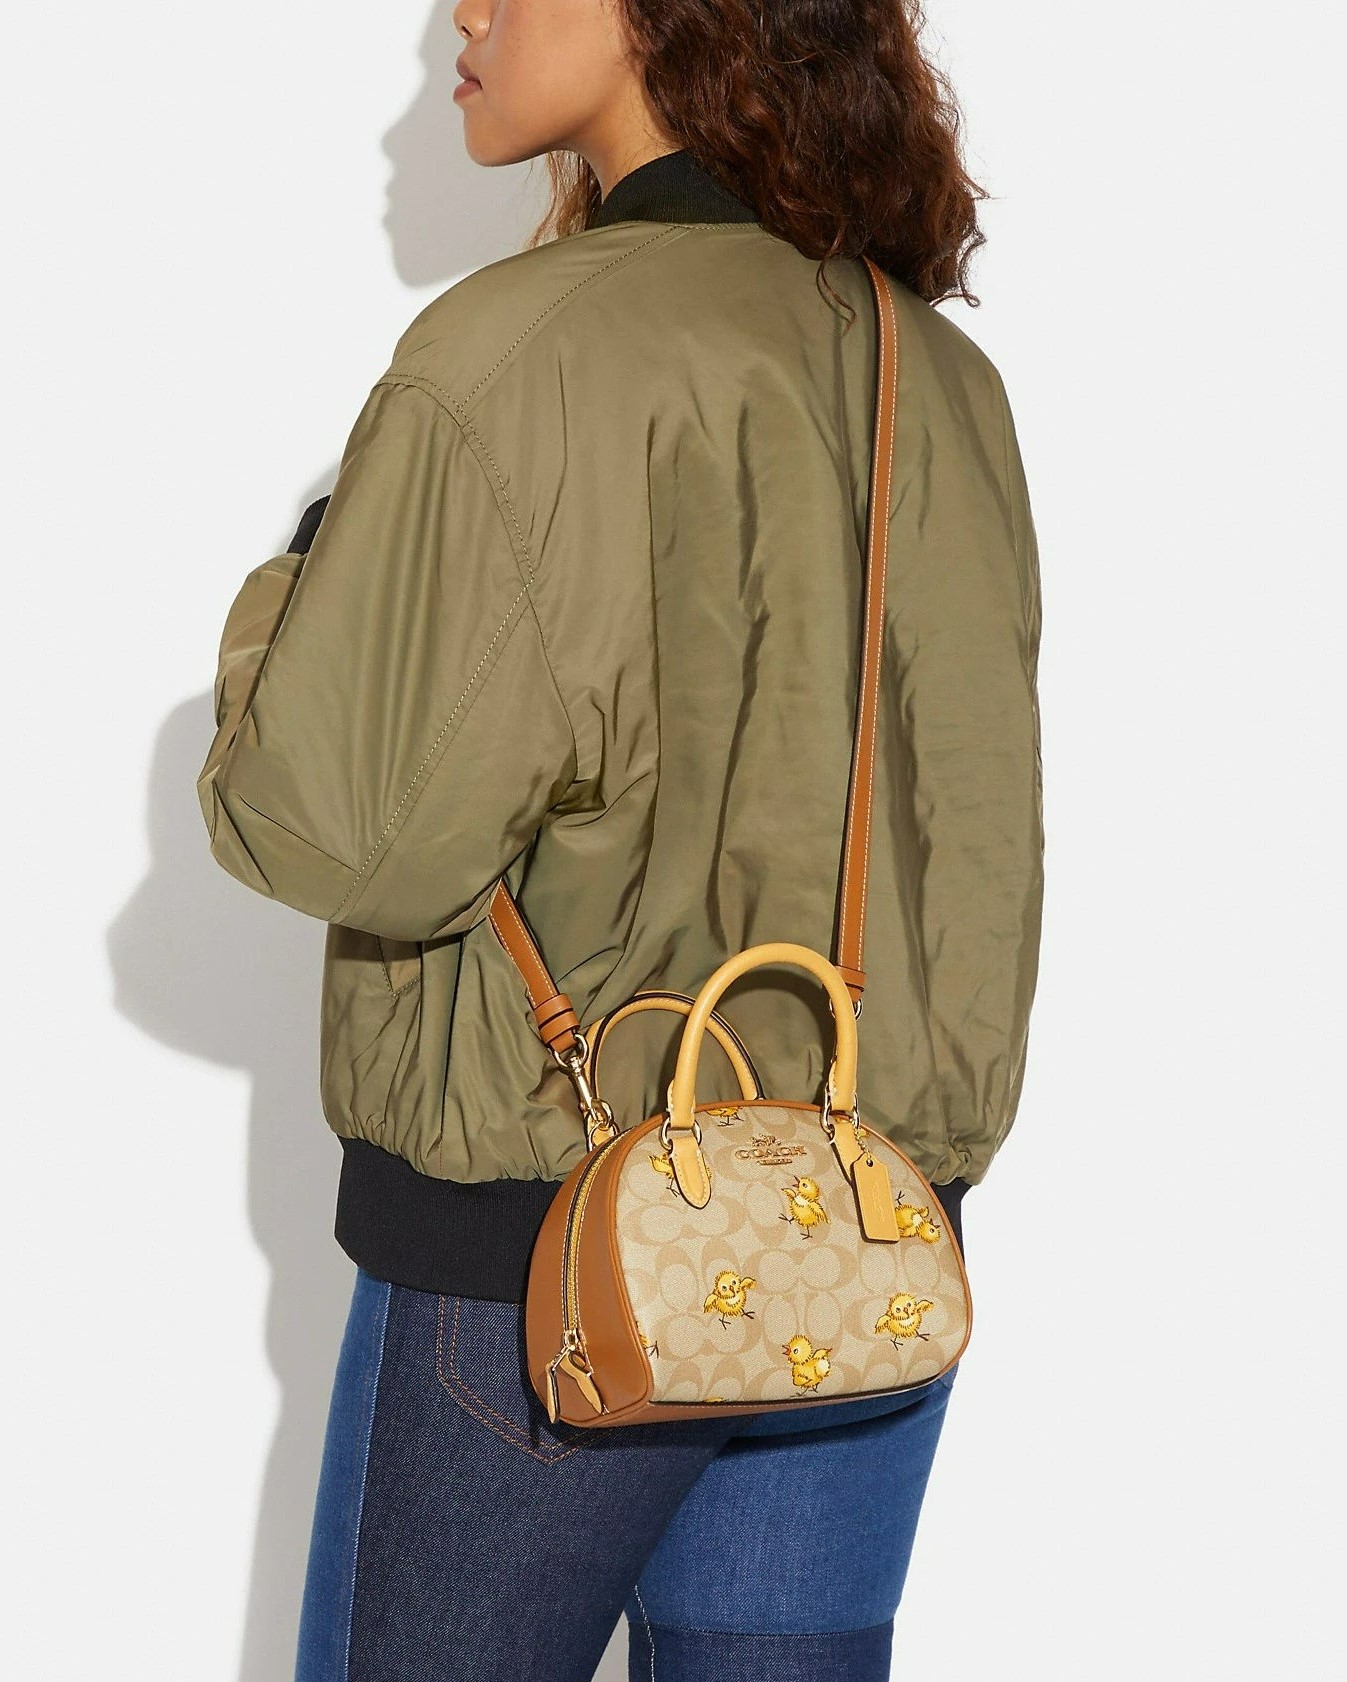 TÚI XÁCH COACH SYDNEY SATCHEL IN SIGNATURE CANVAS WITH TOSSED CHICK PRINT 4